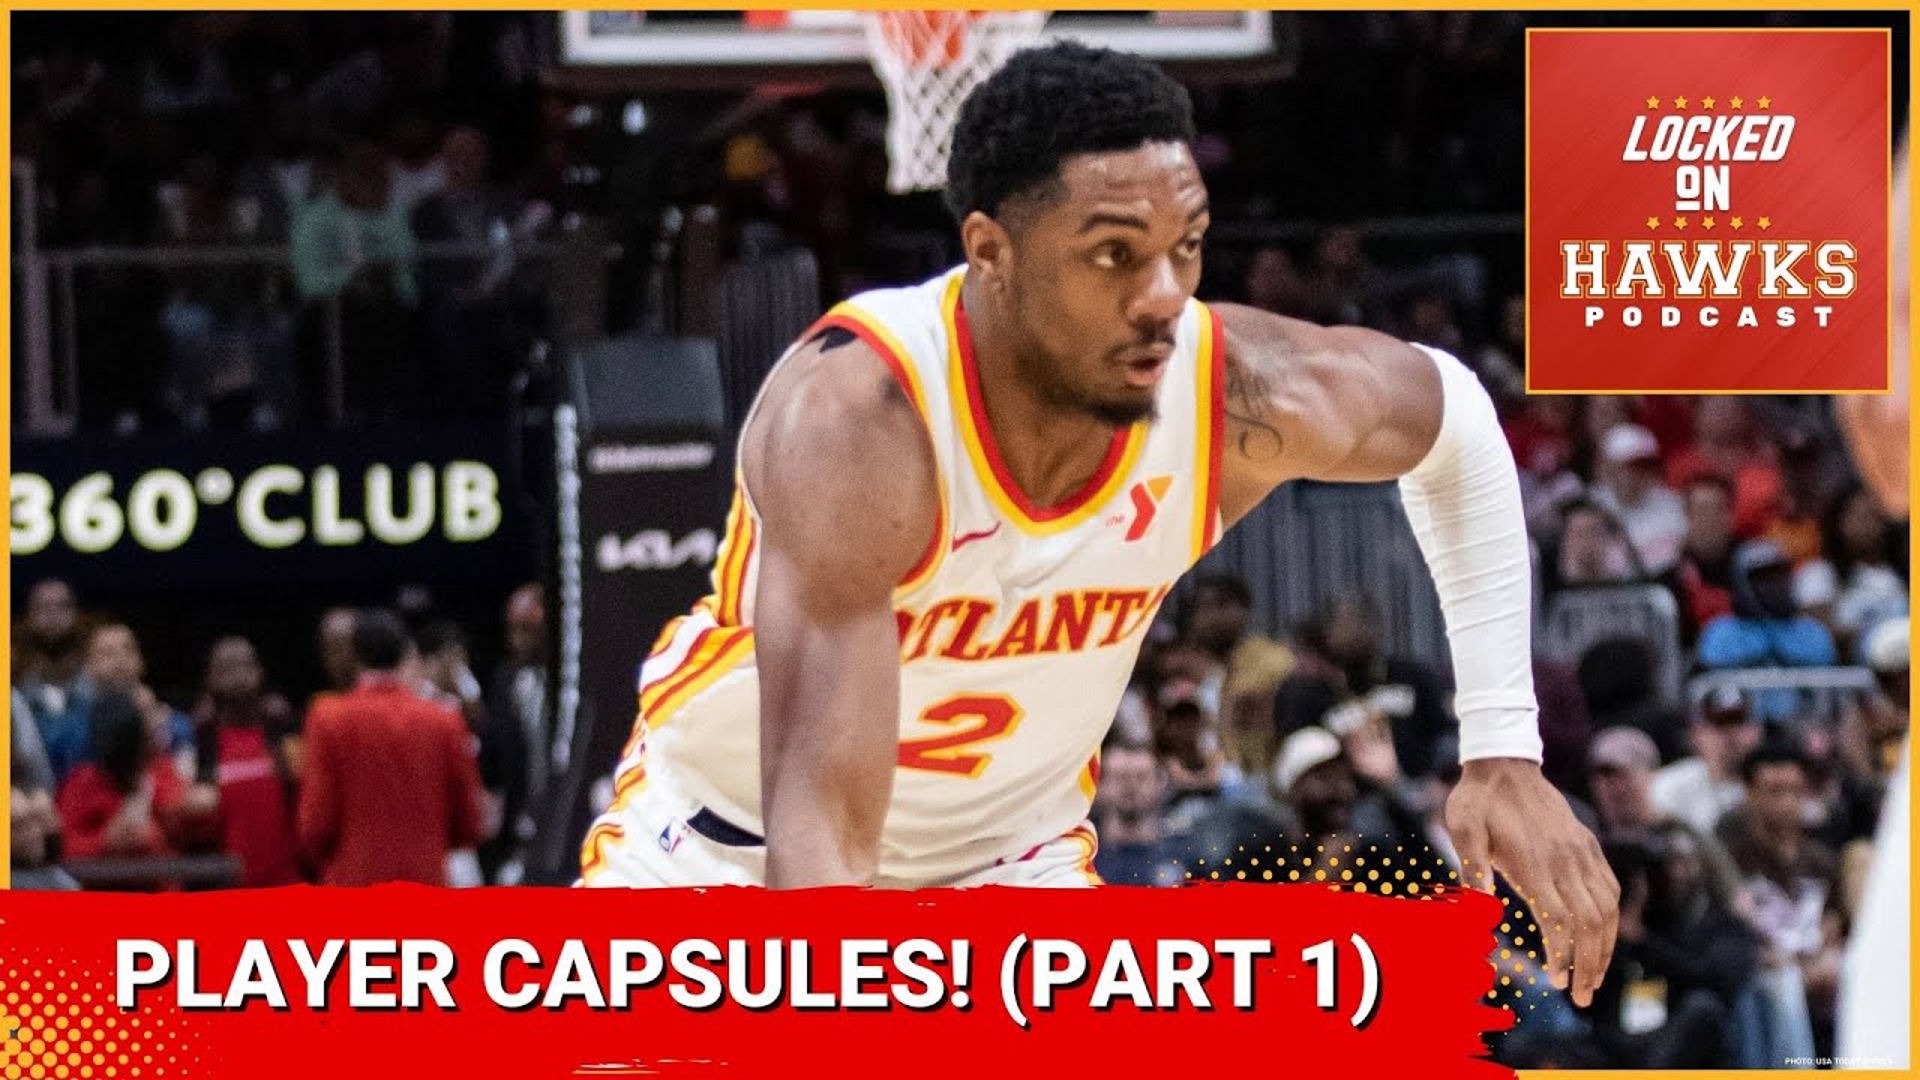 The conversation begins the 2024 player capsule series focused on the Atlanta Hawks, with focus on Trent Forrest, Wes Matthews, and Bruno Fernando.